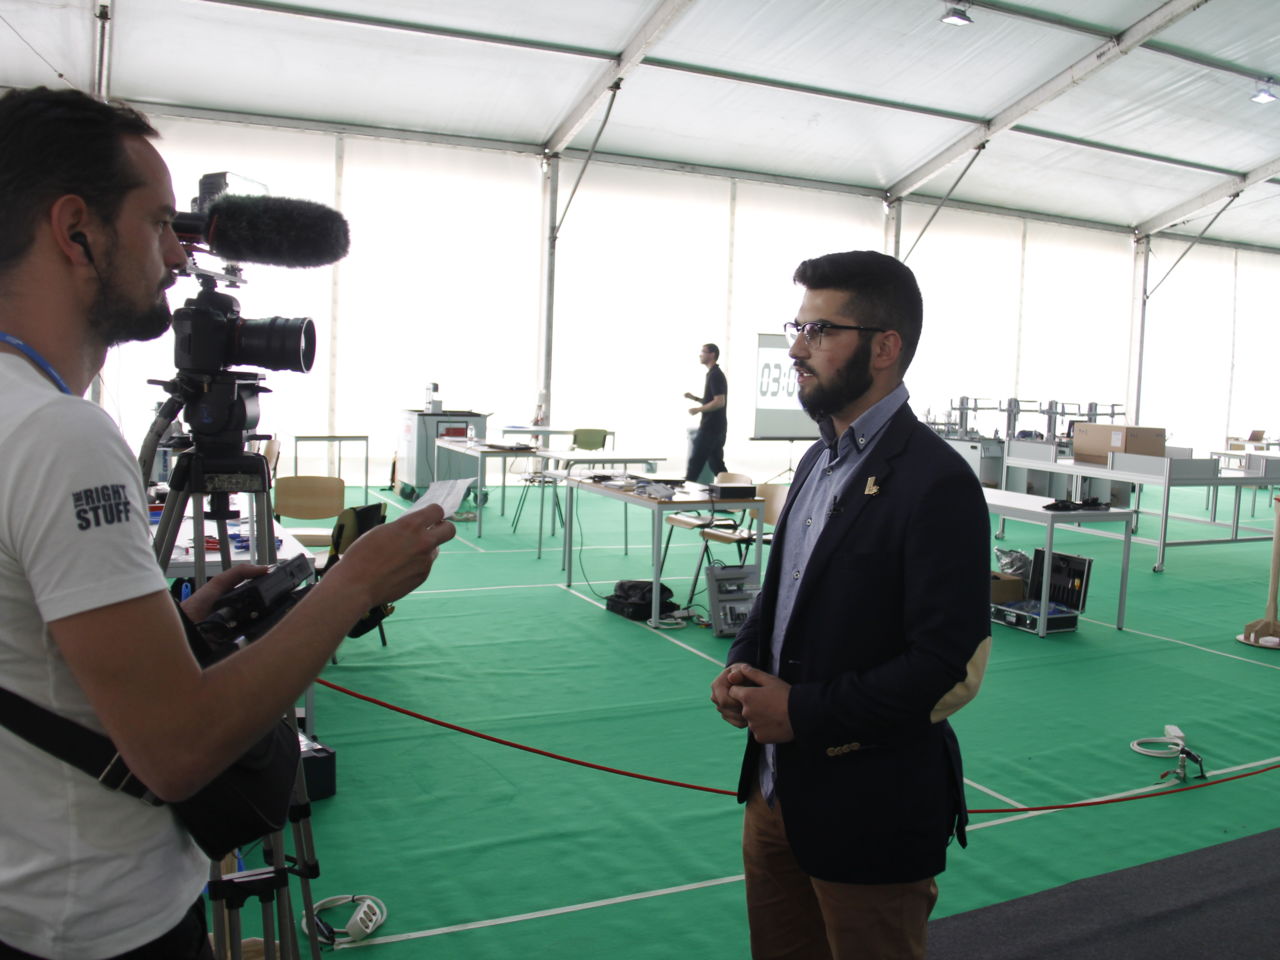 WorldSkills Portugal's journalism as a skills competition